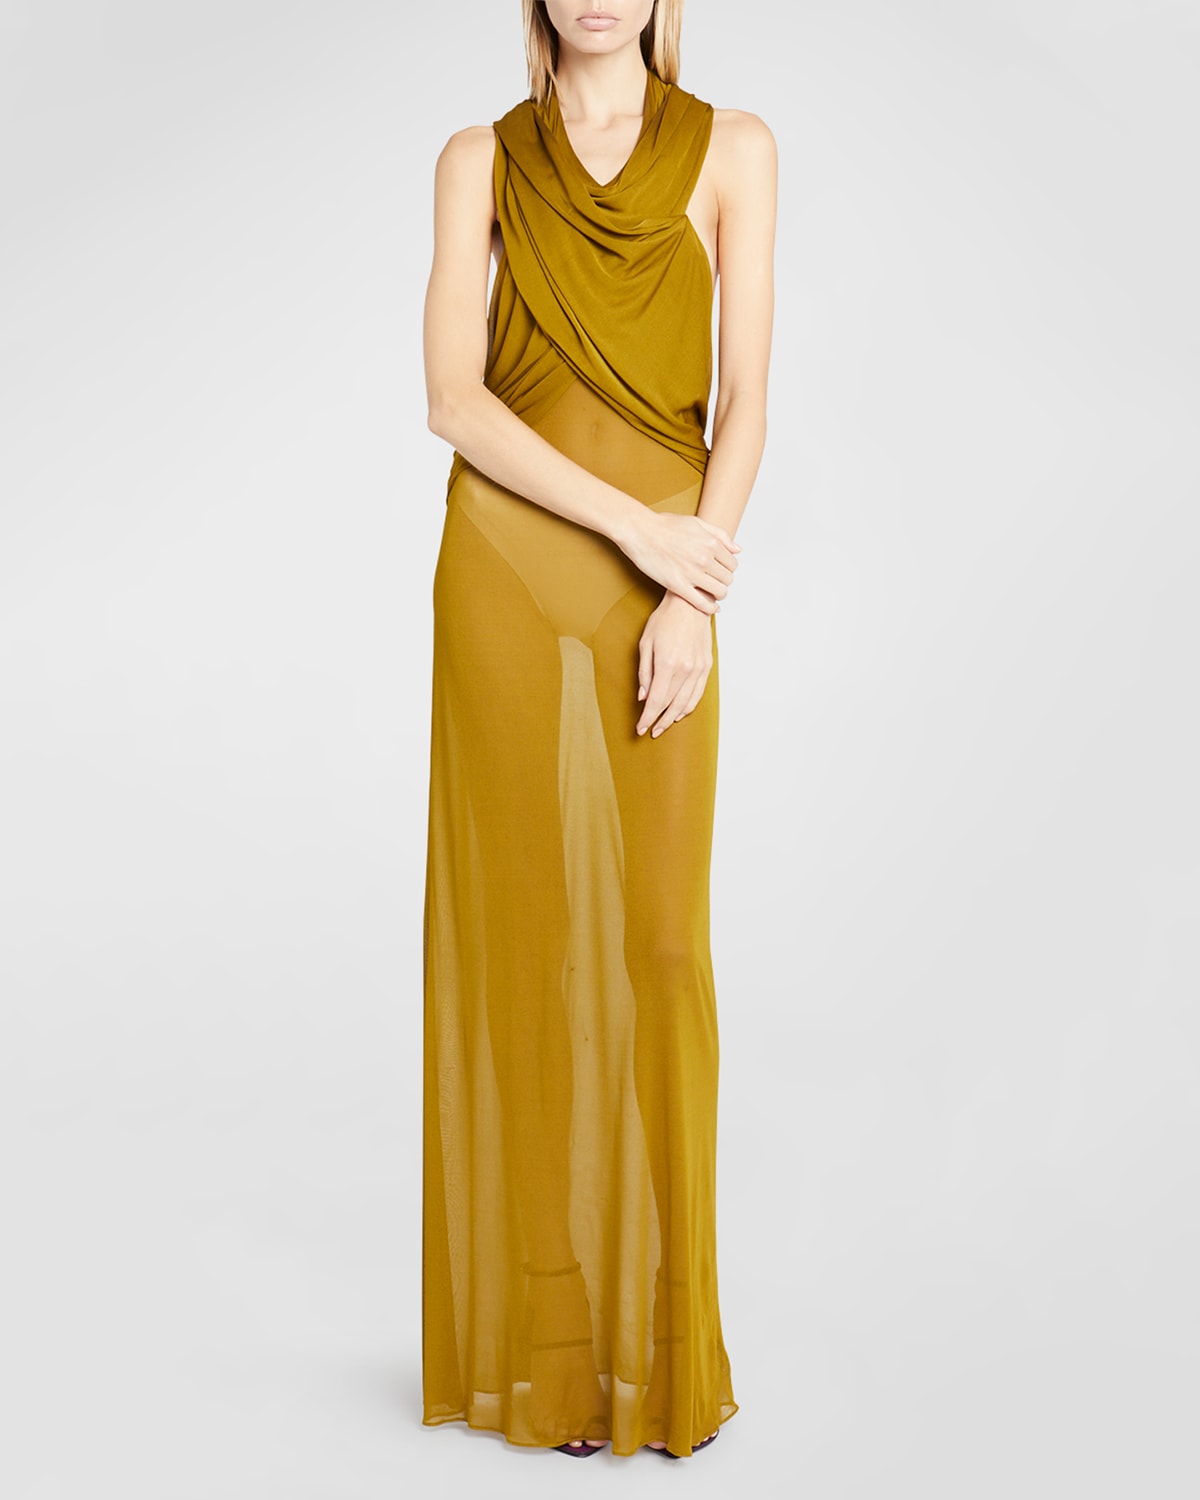 SAINT LAURENT SHEER EVENING GOWN WITH DRAPED HOOD